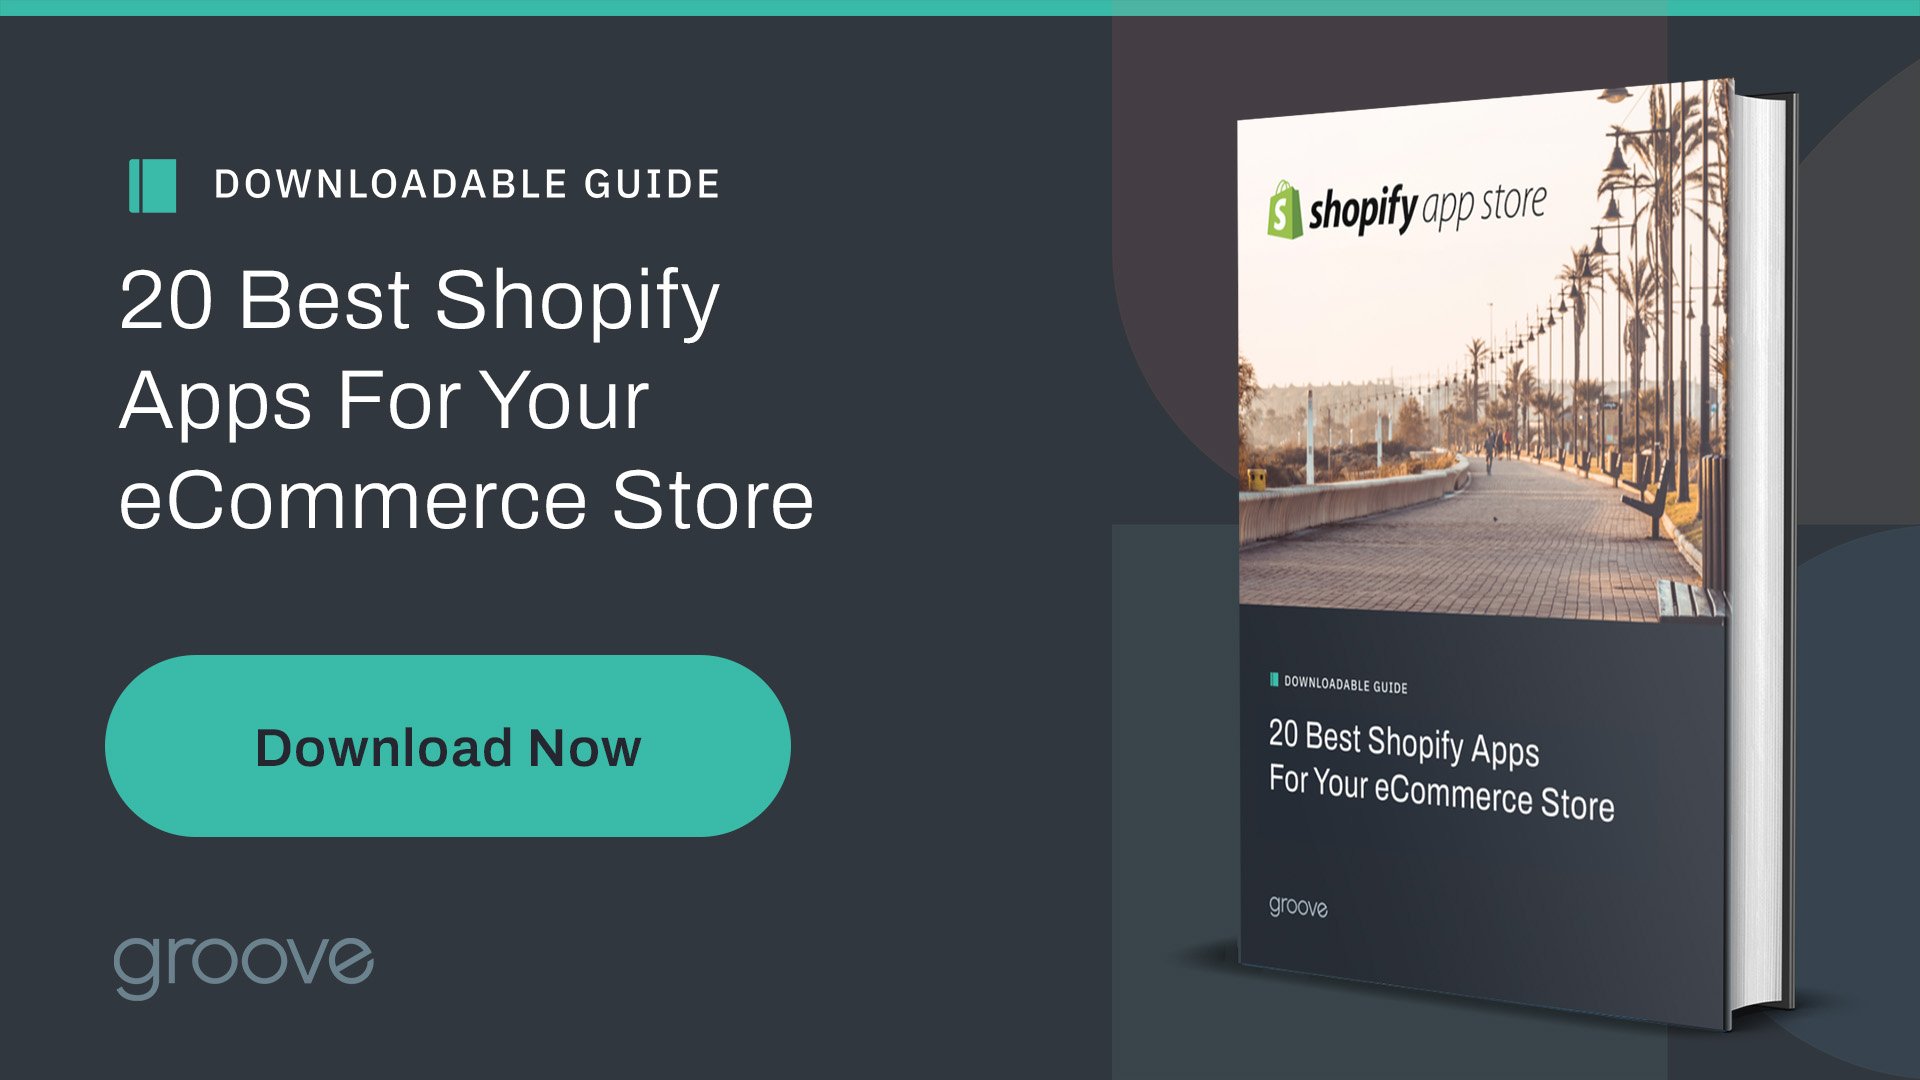 20 Best Shopify Apps For Your eCommerce Store: Marketing, Customer Service, Shipping, Fraud, & More